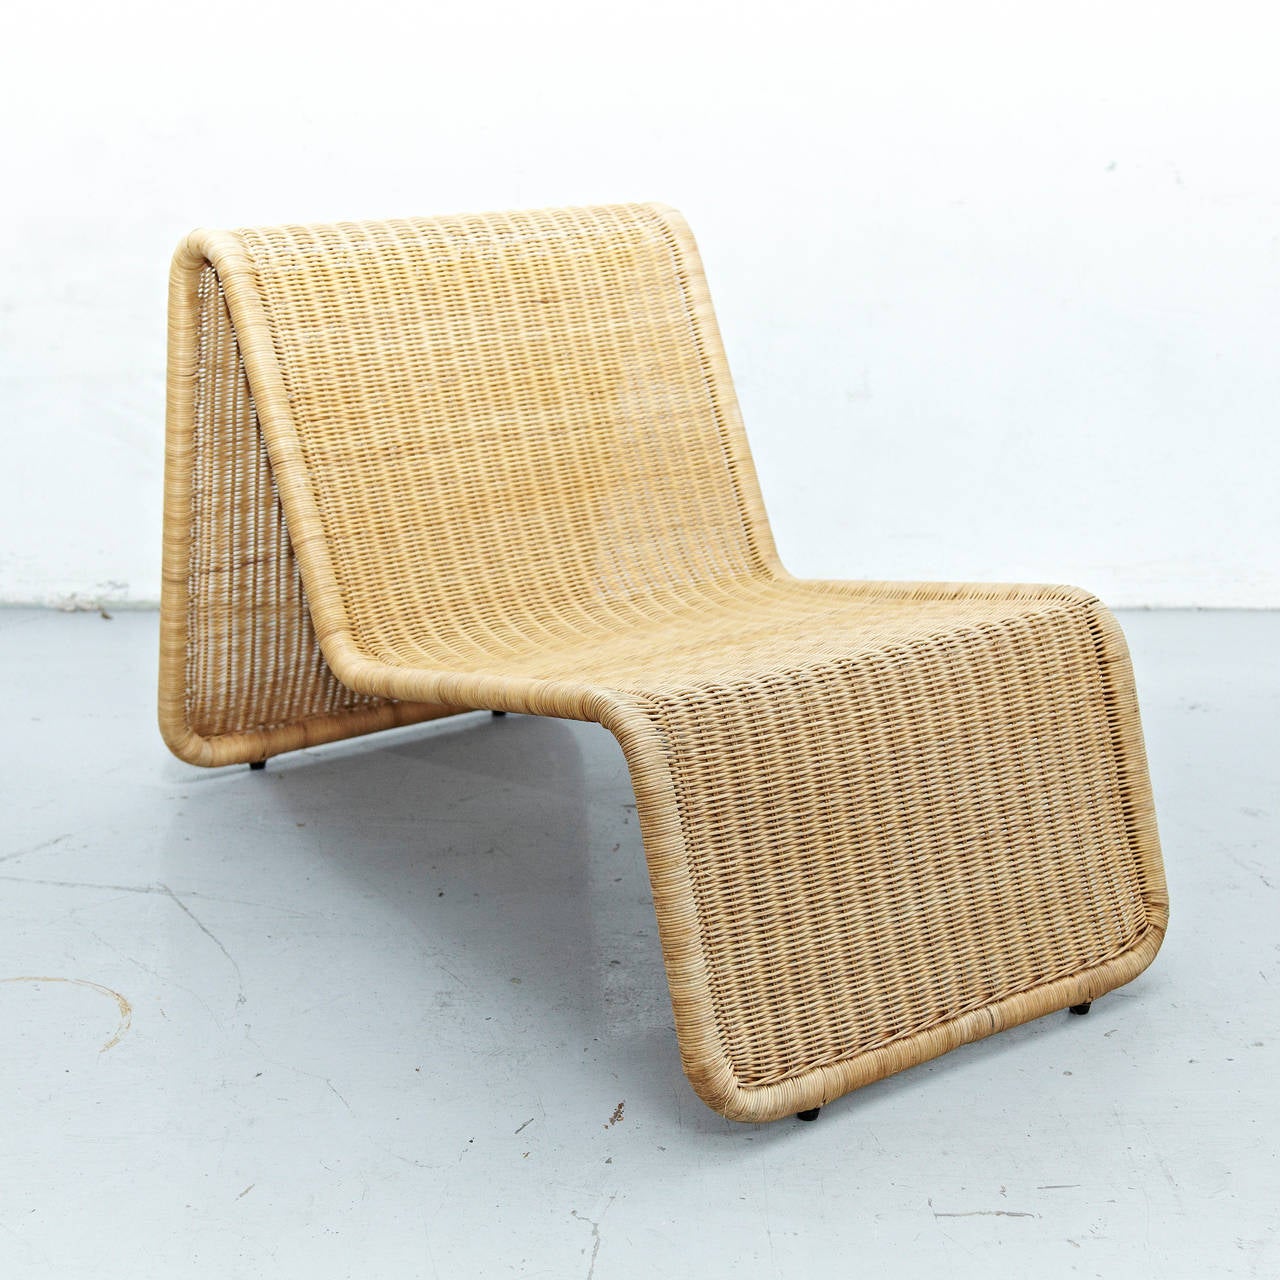 Lounge chairs, model P3, designed by Tito Agnoli around 1960.
Manufactured by Pierantonio Bonacina (Italy)
Tubular lacquered steel frame, woven wicker, modular system model that might be used for indoors and outdoors. Both in original